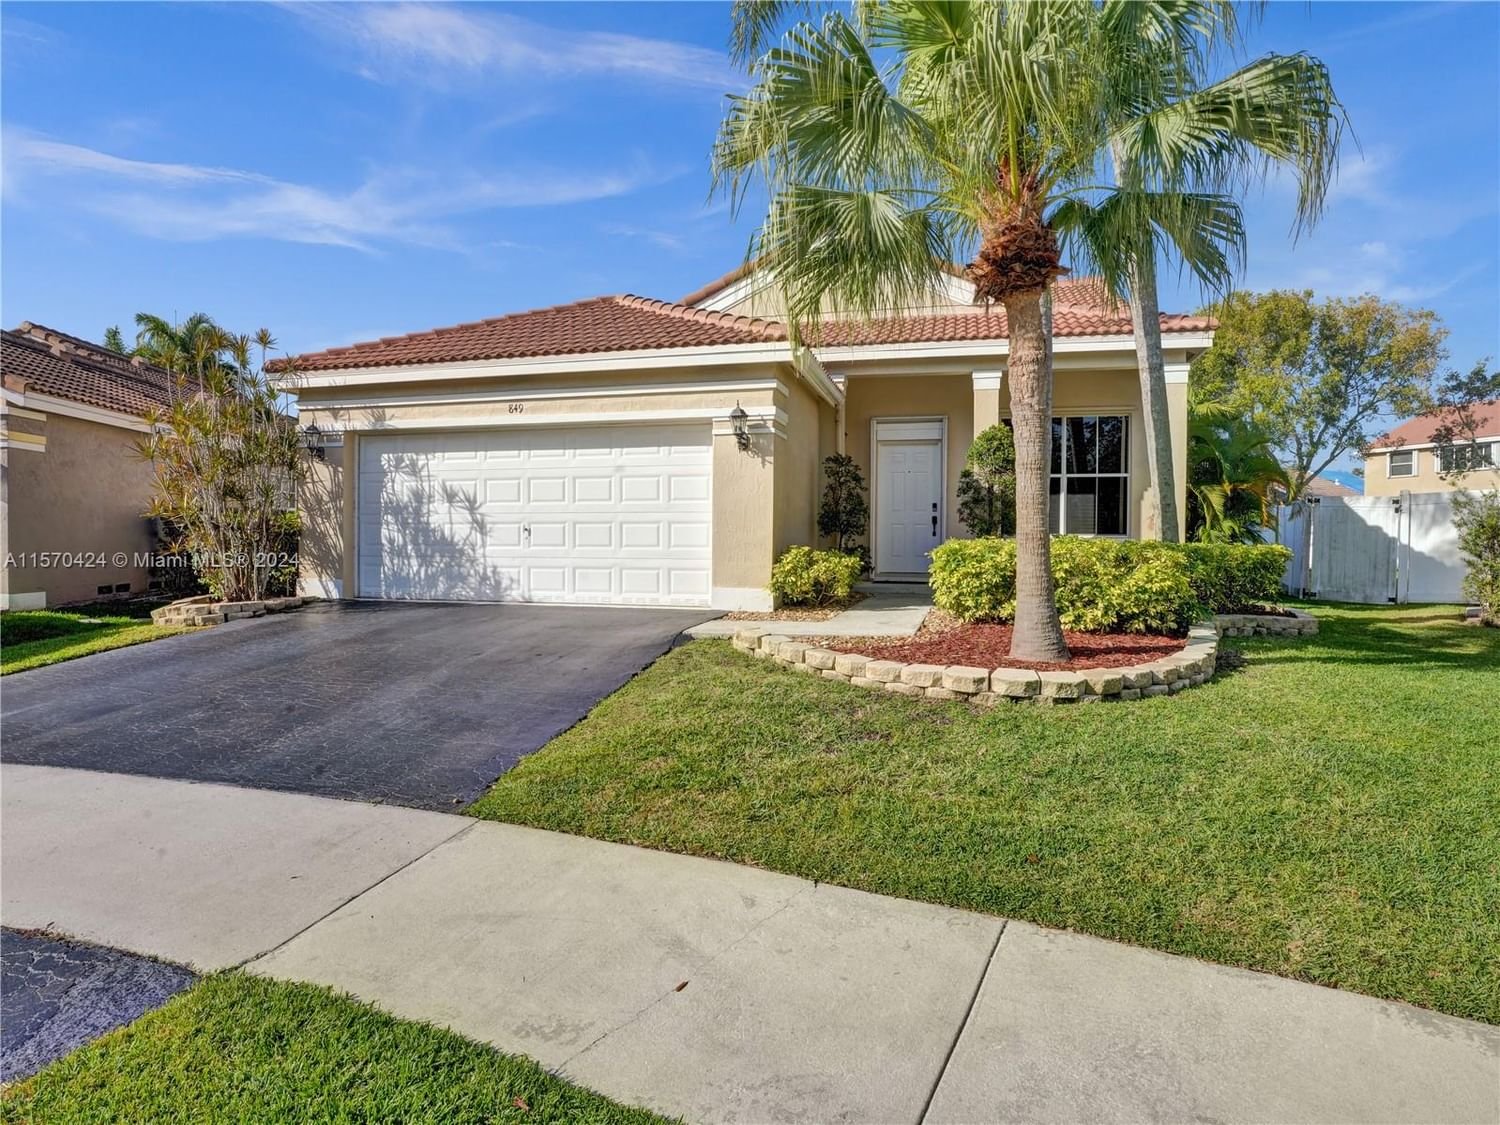 Real estate property located at 849 Falling Water Rd, Broward County, SECTOR 4 NORTH, Weston, FL